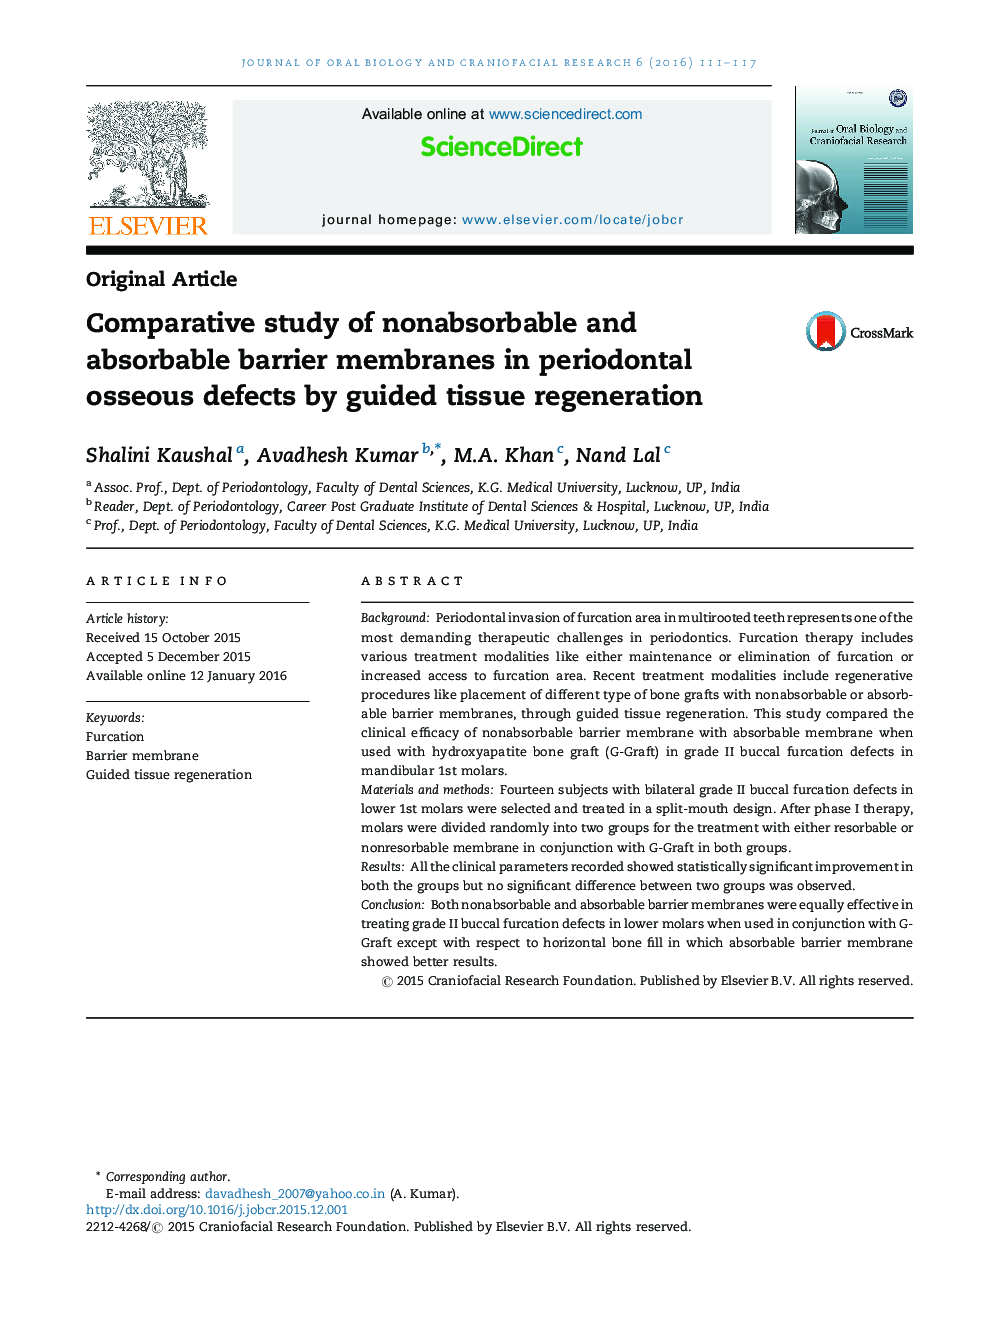 Comparative study of nonabsorbable and absorbable barrier membranes in periodontal osseous defects by guided tissue regeneration